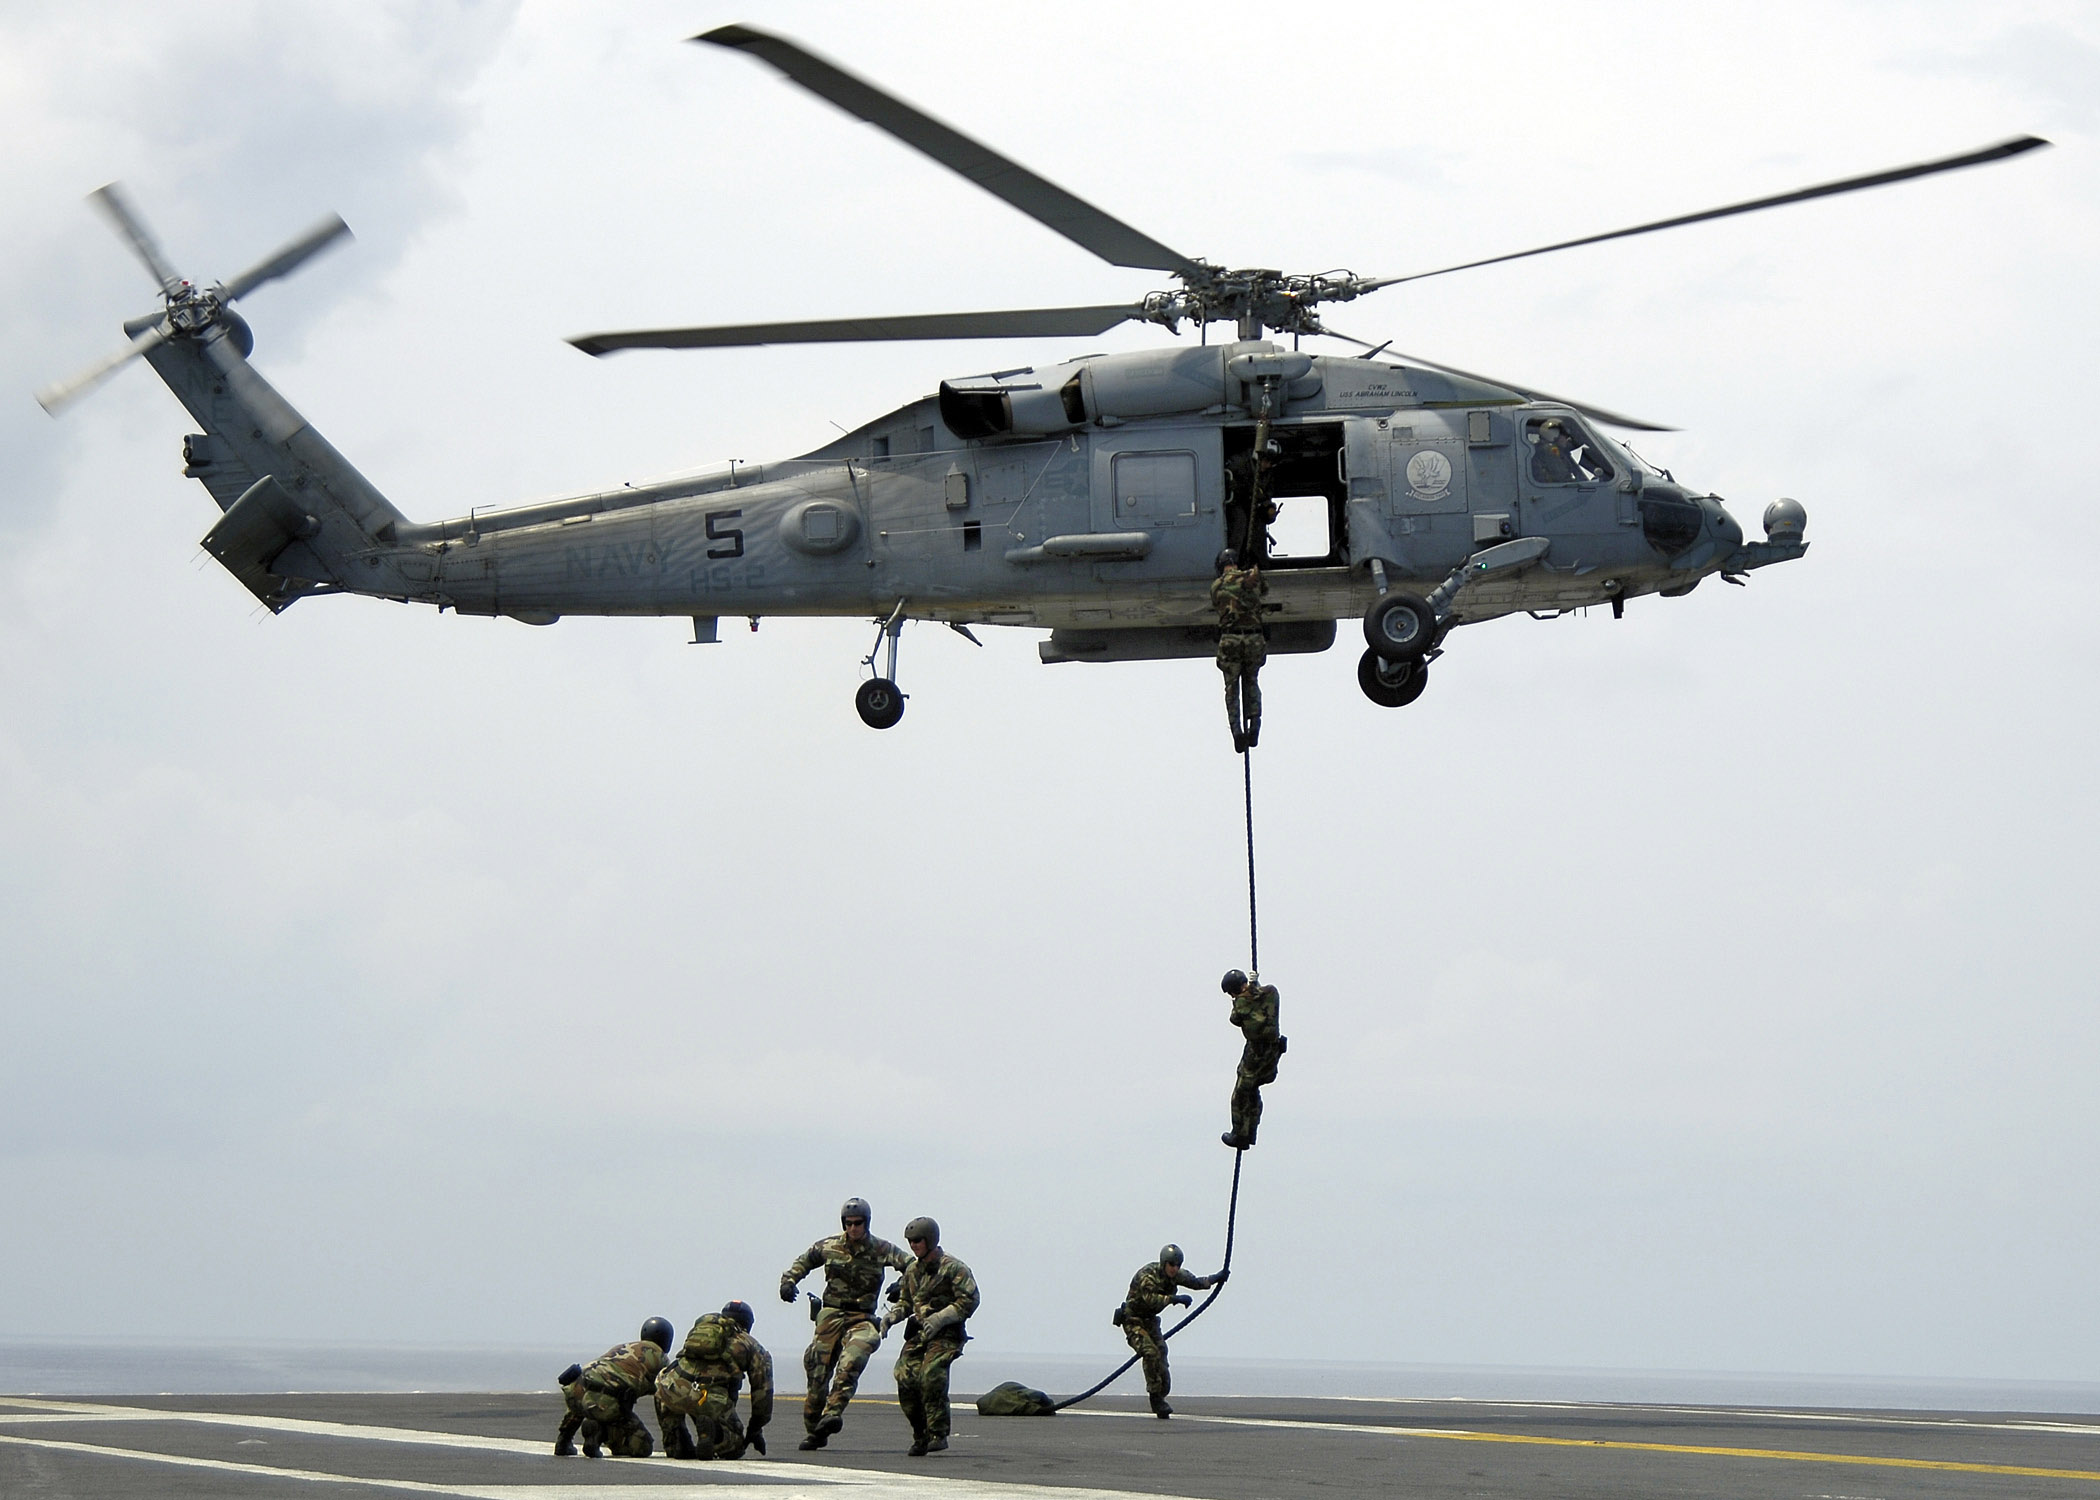 US Navy 060417-N-4166B-068 Members of Explosive Ordnance Disposal Mobile Unit Eleven (EODMU-11) Detachment 9, fast rope from an SH-60F Seahawk helicopter